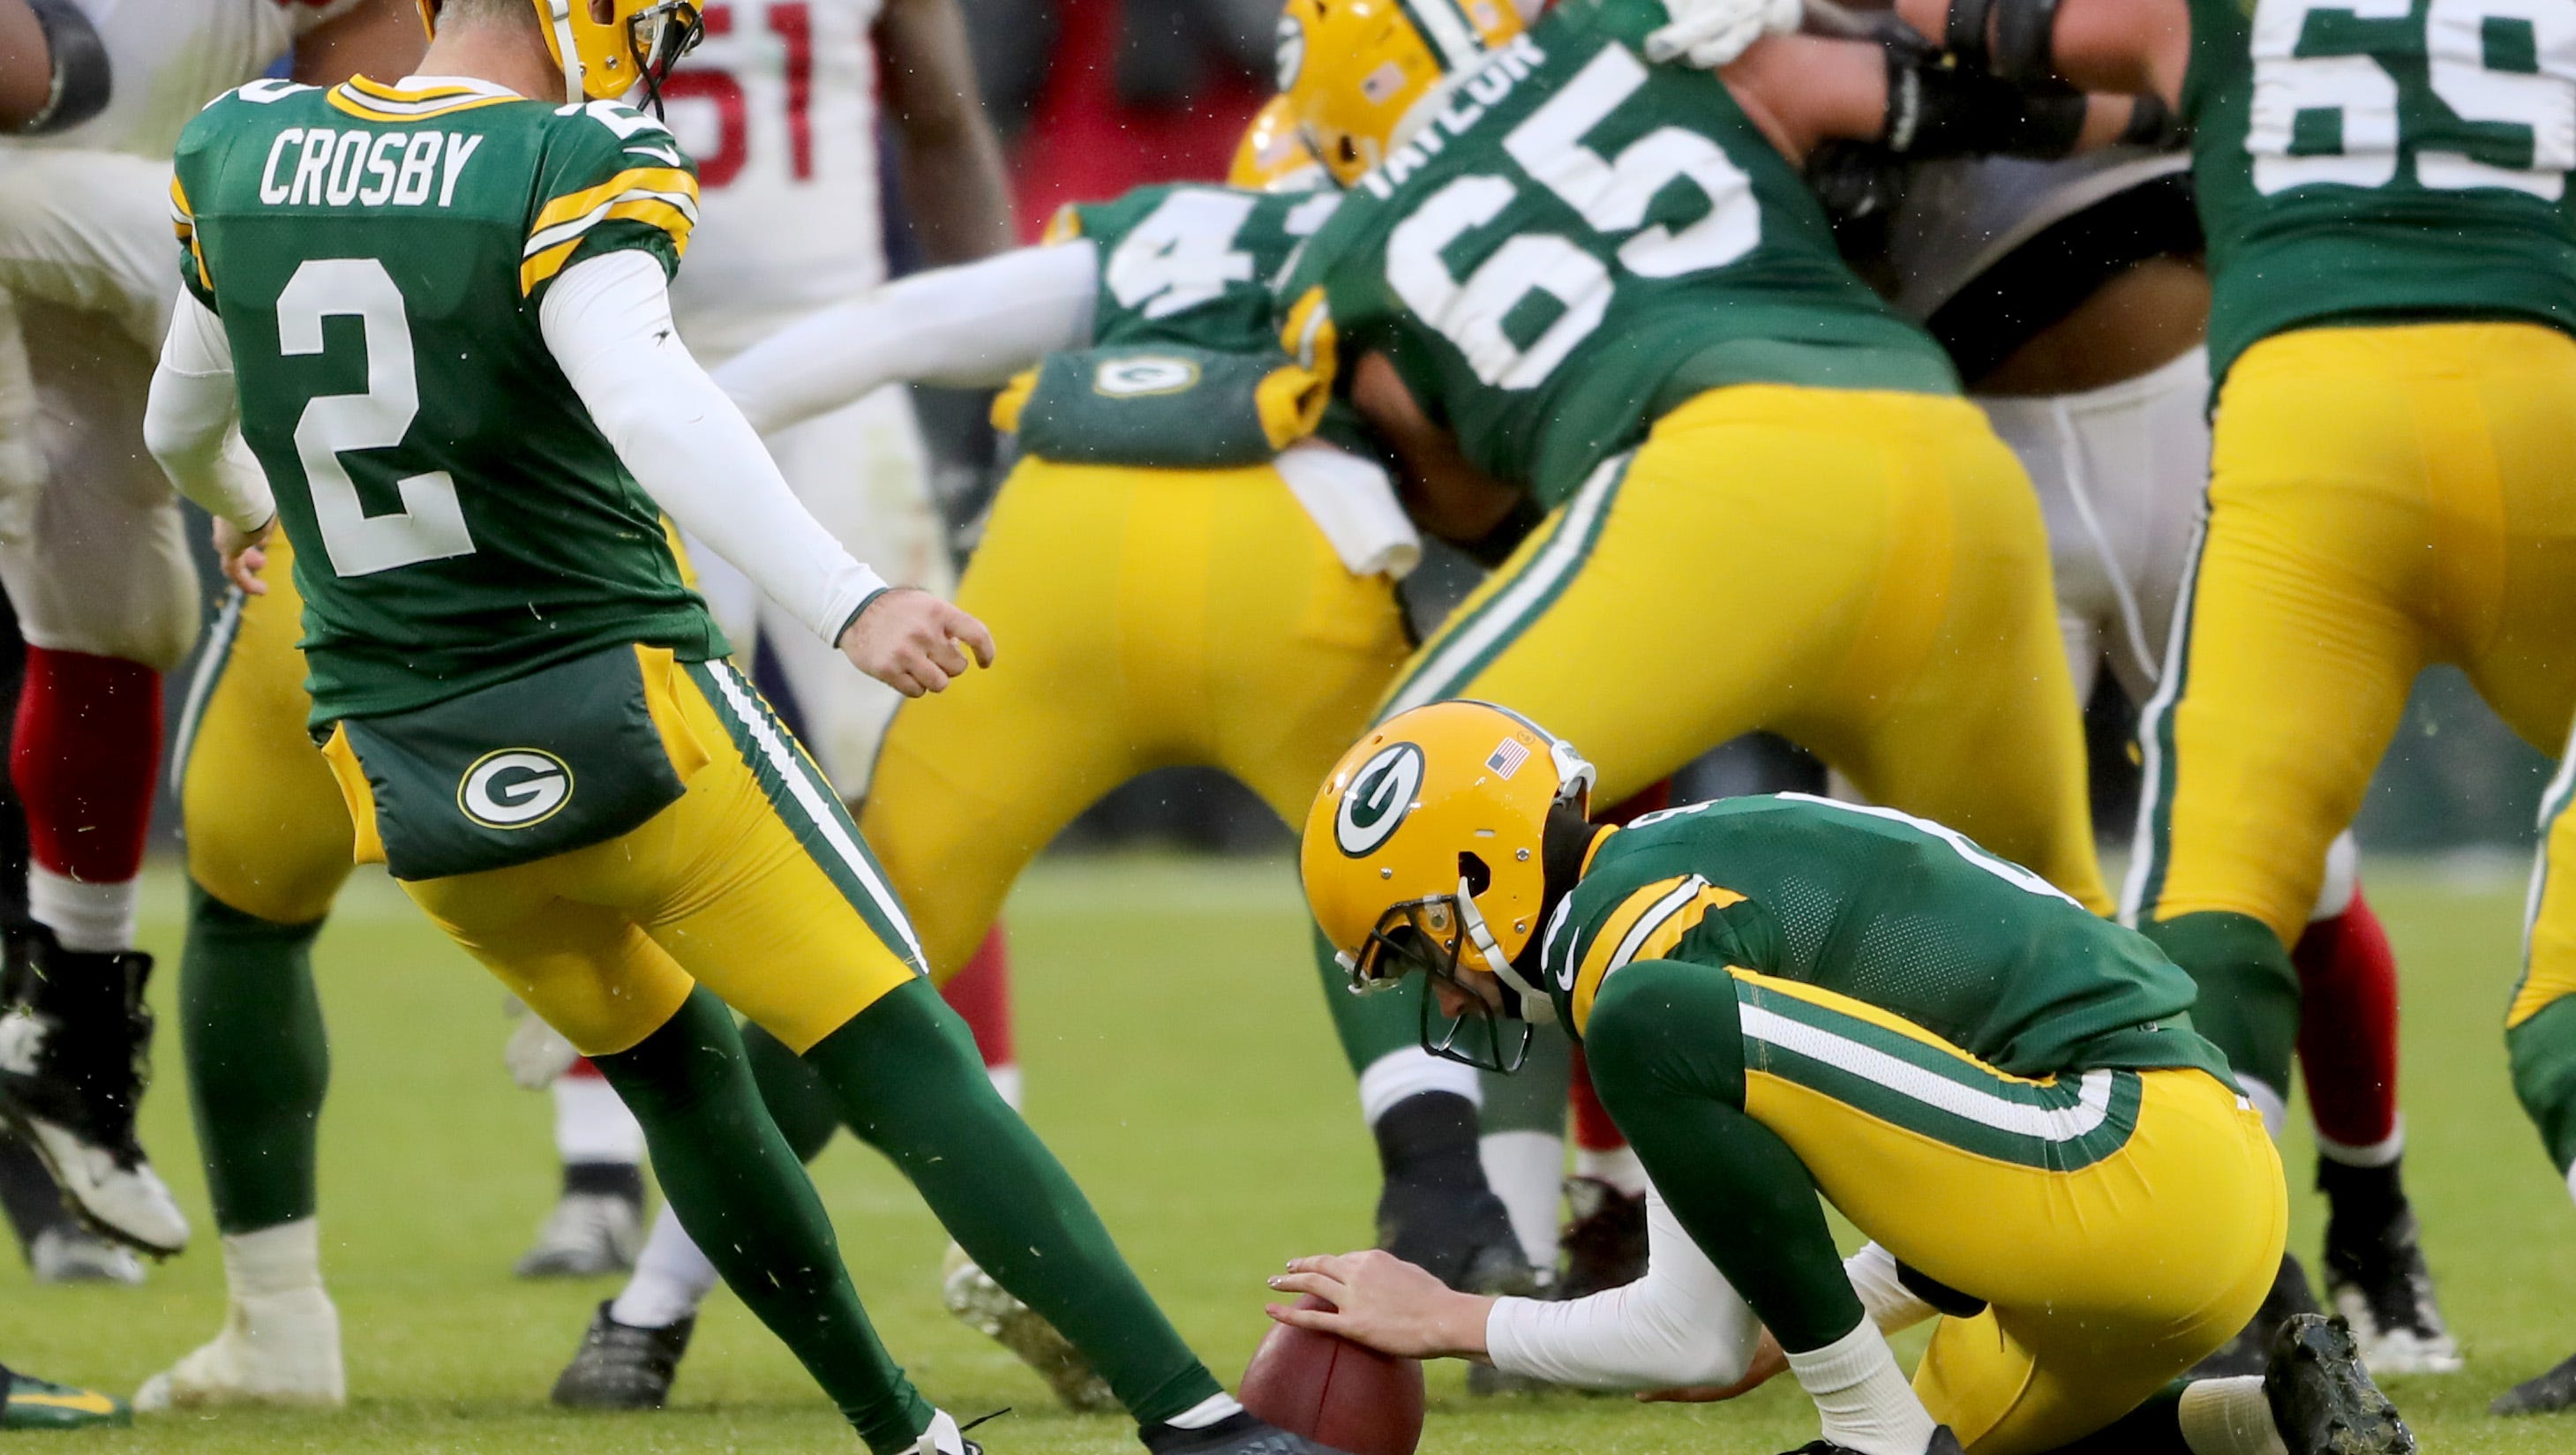 Green Bay Packers kicker Mason Crosby (2) misses a 49 yard field goal attempt as punter J.K. Scott (6) holds at the end of the game against the Arizona Cardinals Sunday, December 2, 2018 at Lambeau Field in Green Bay, Wis.
Jim Matthews/USA TODAY NETWORK-Wis